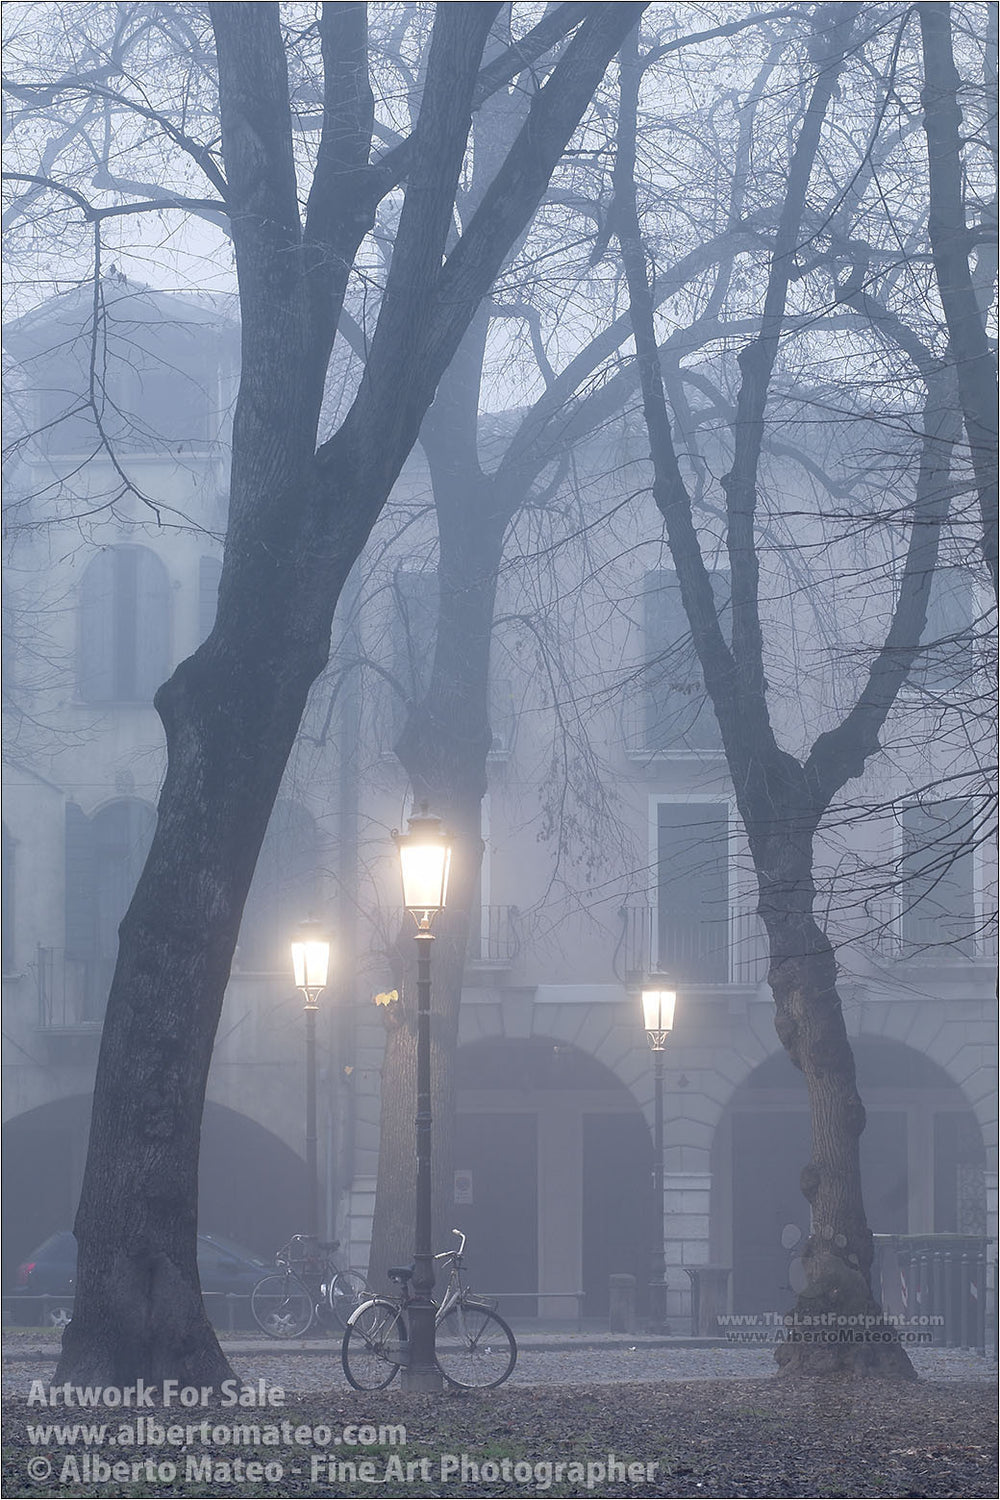 Fog in Piazza del Castello, Padua, Italy. | Full view of the Print.